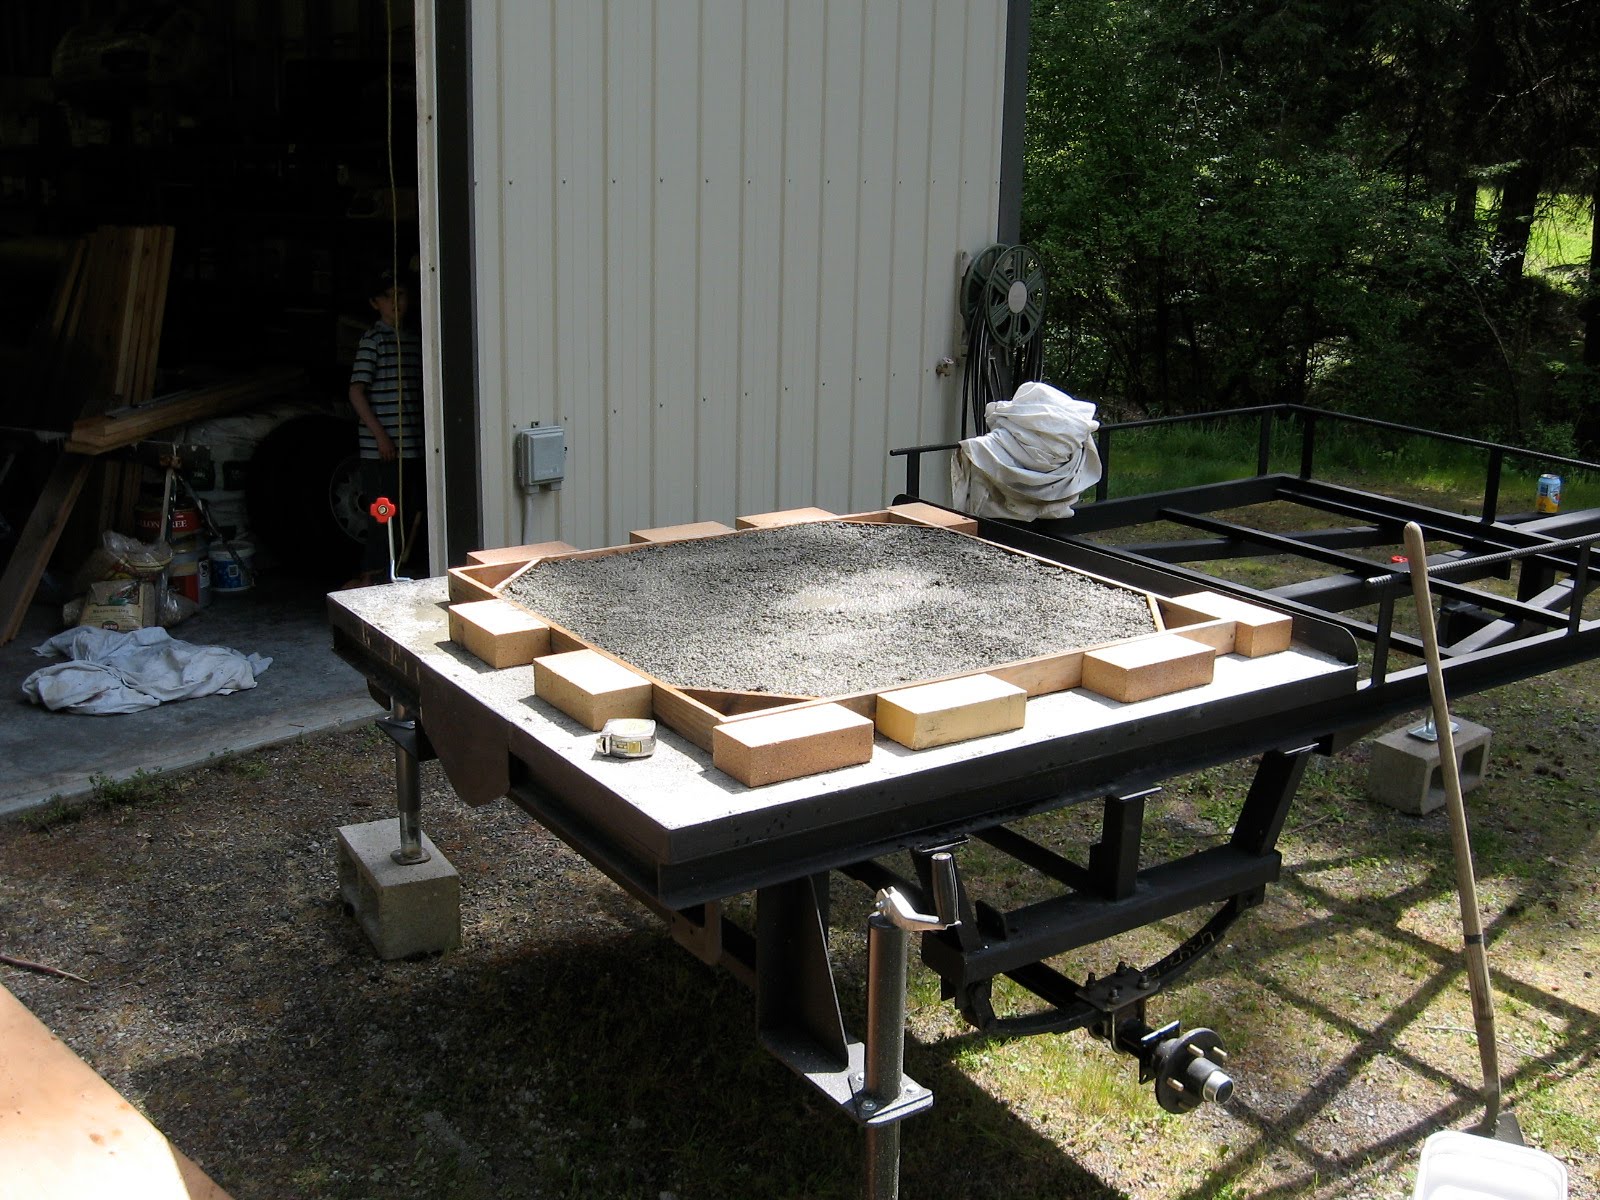 Orcas Island Blog - Inn at Ship Bay: Wood Fired Pizza Oven Build